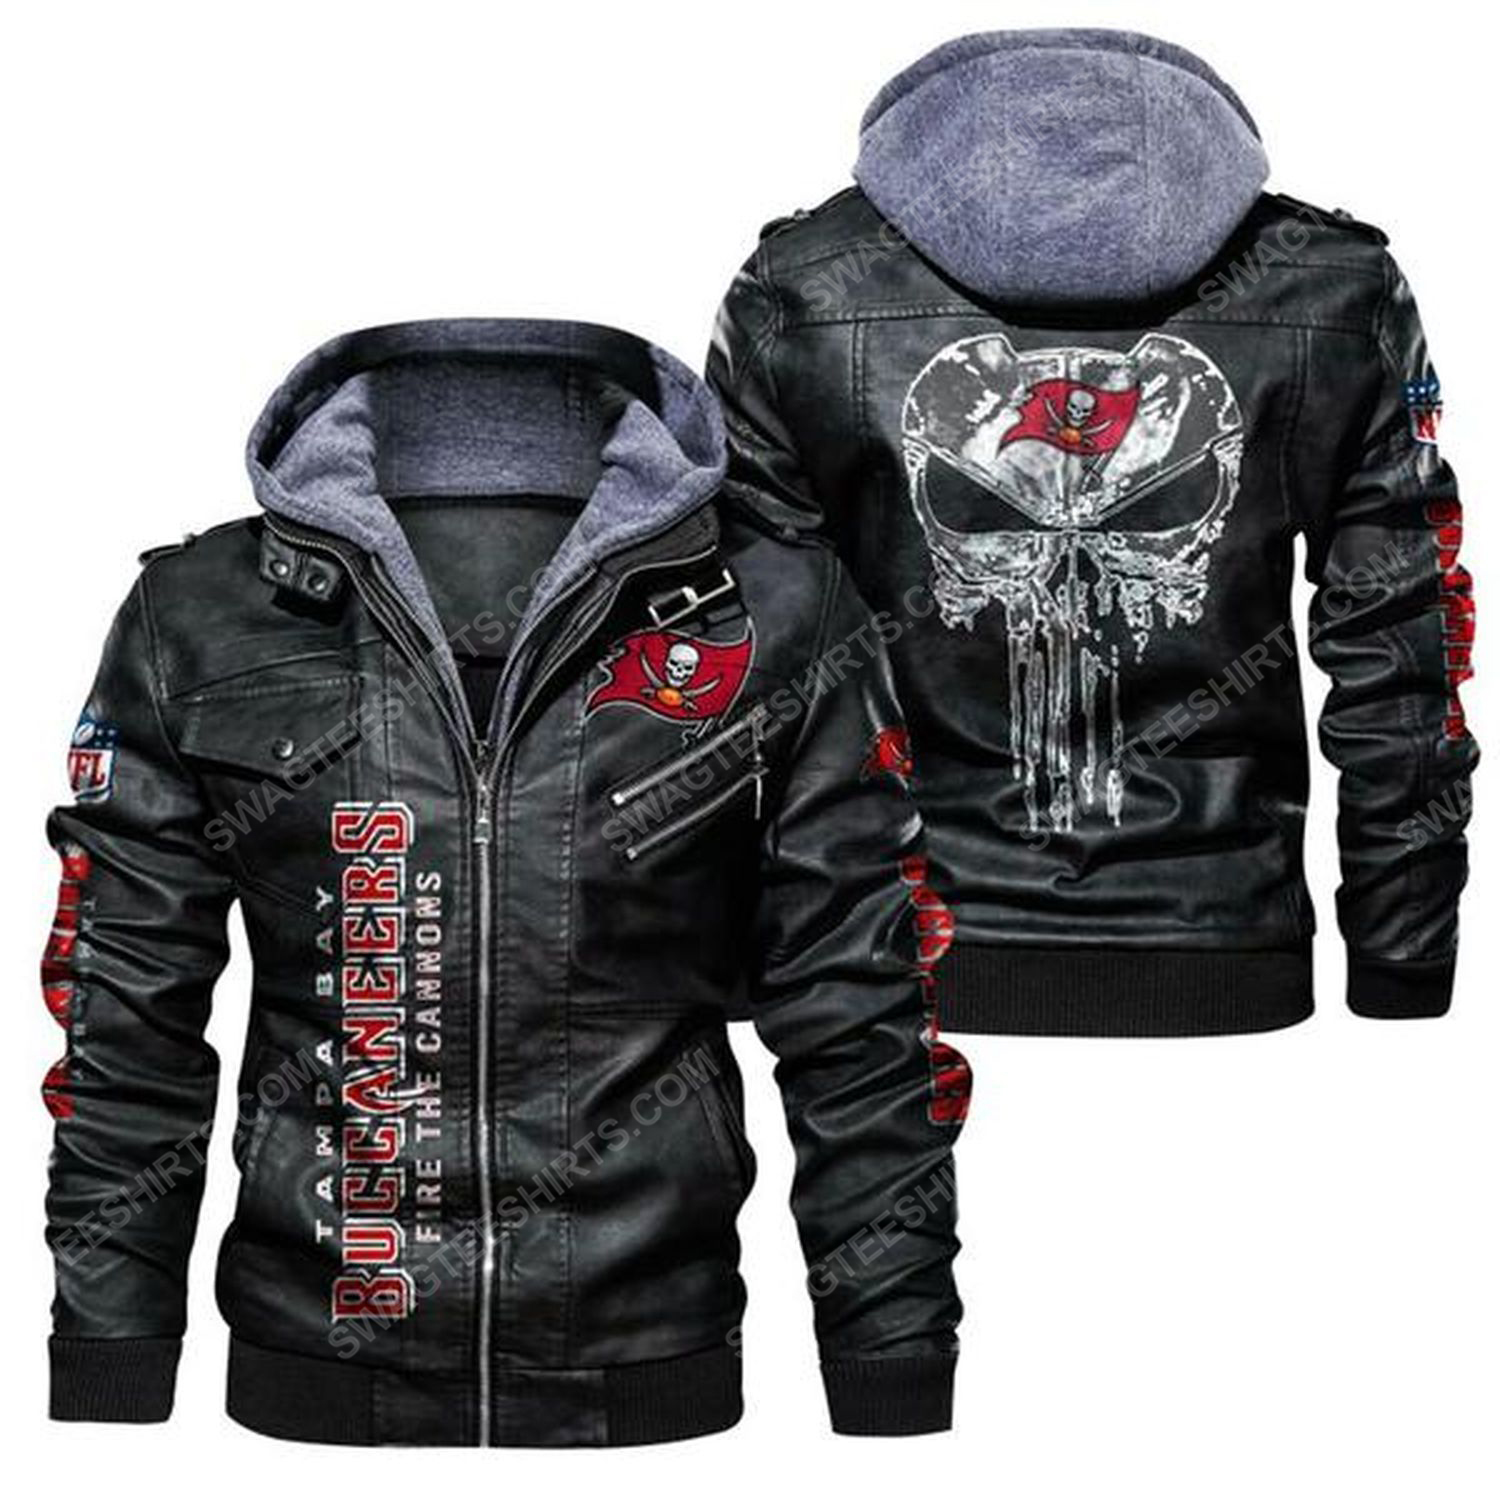 National football league tampa bay buccaneers leather jacket - black